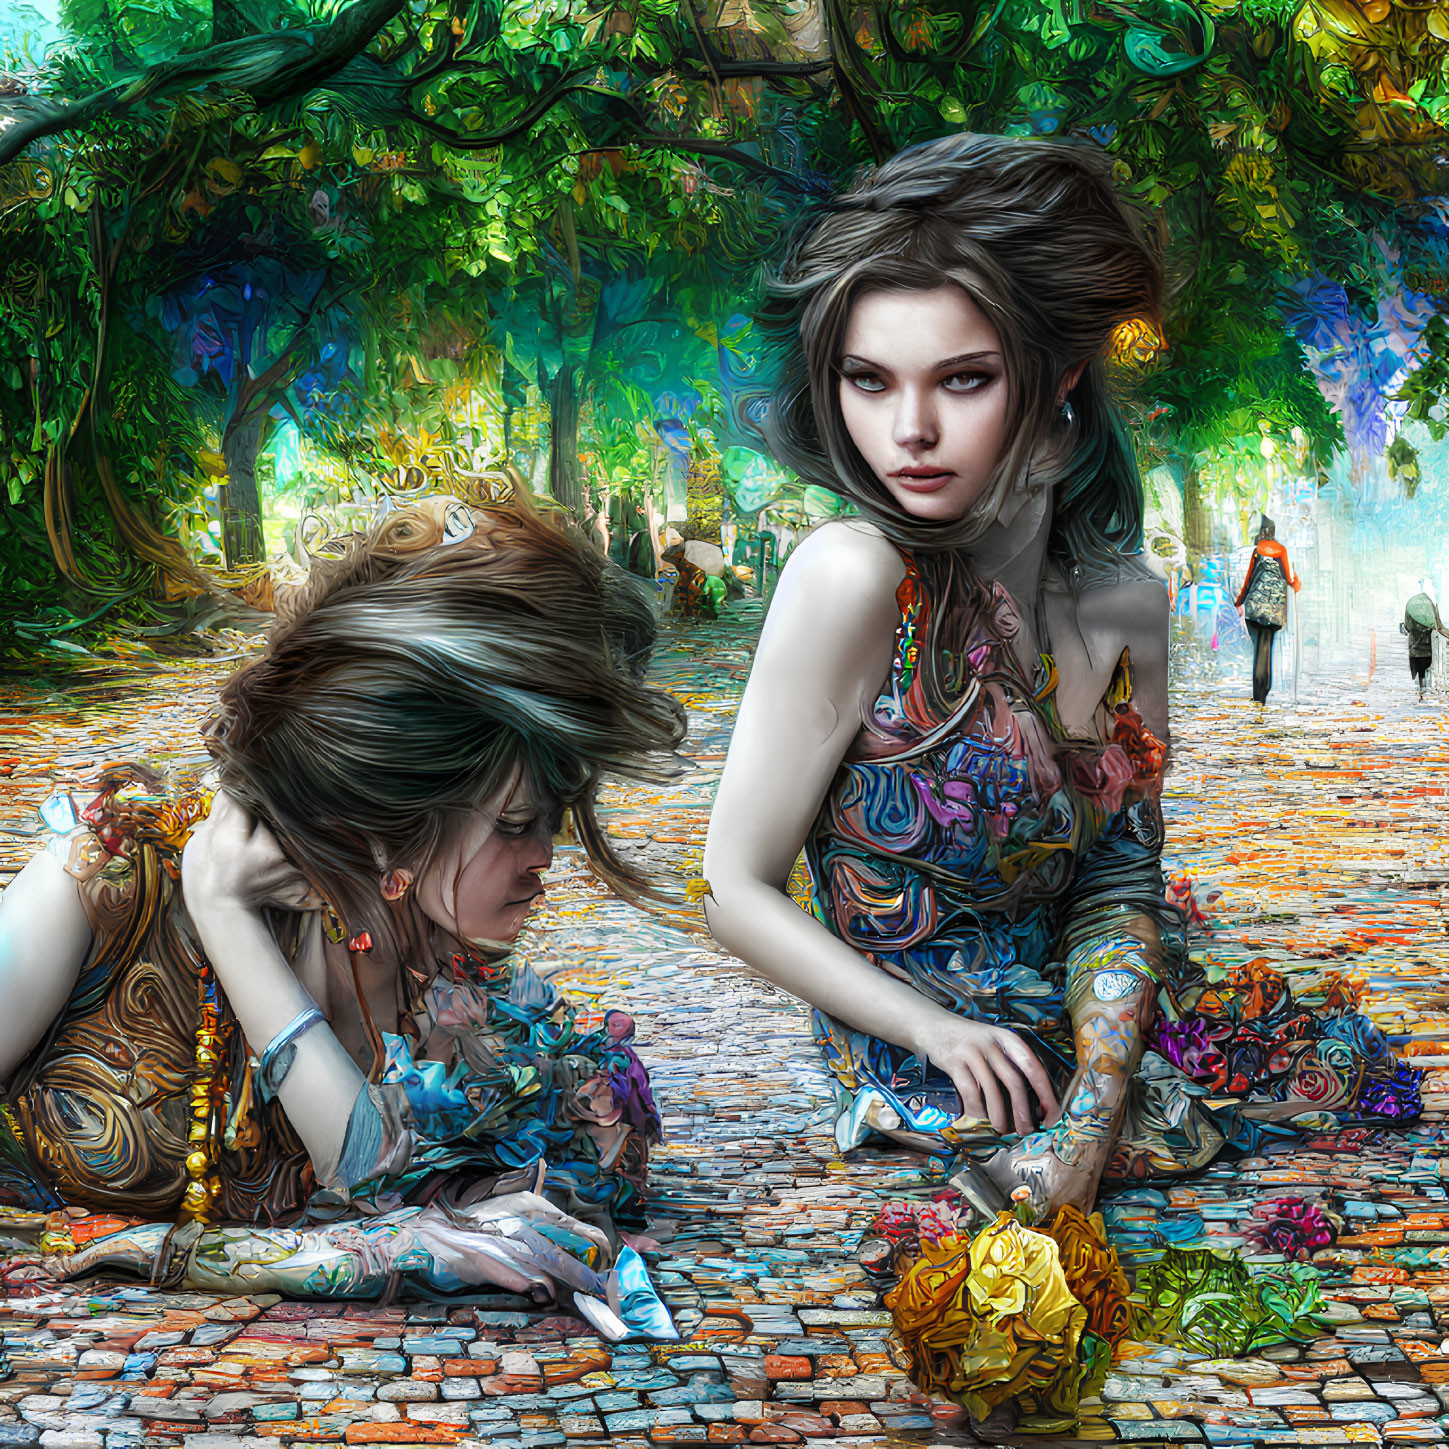 Two intricately tattooed women in vibrant attire amidst colorful flowers and butterflies on a cobblestone path